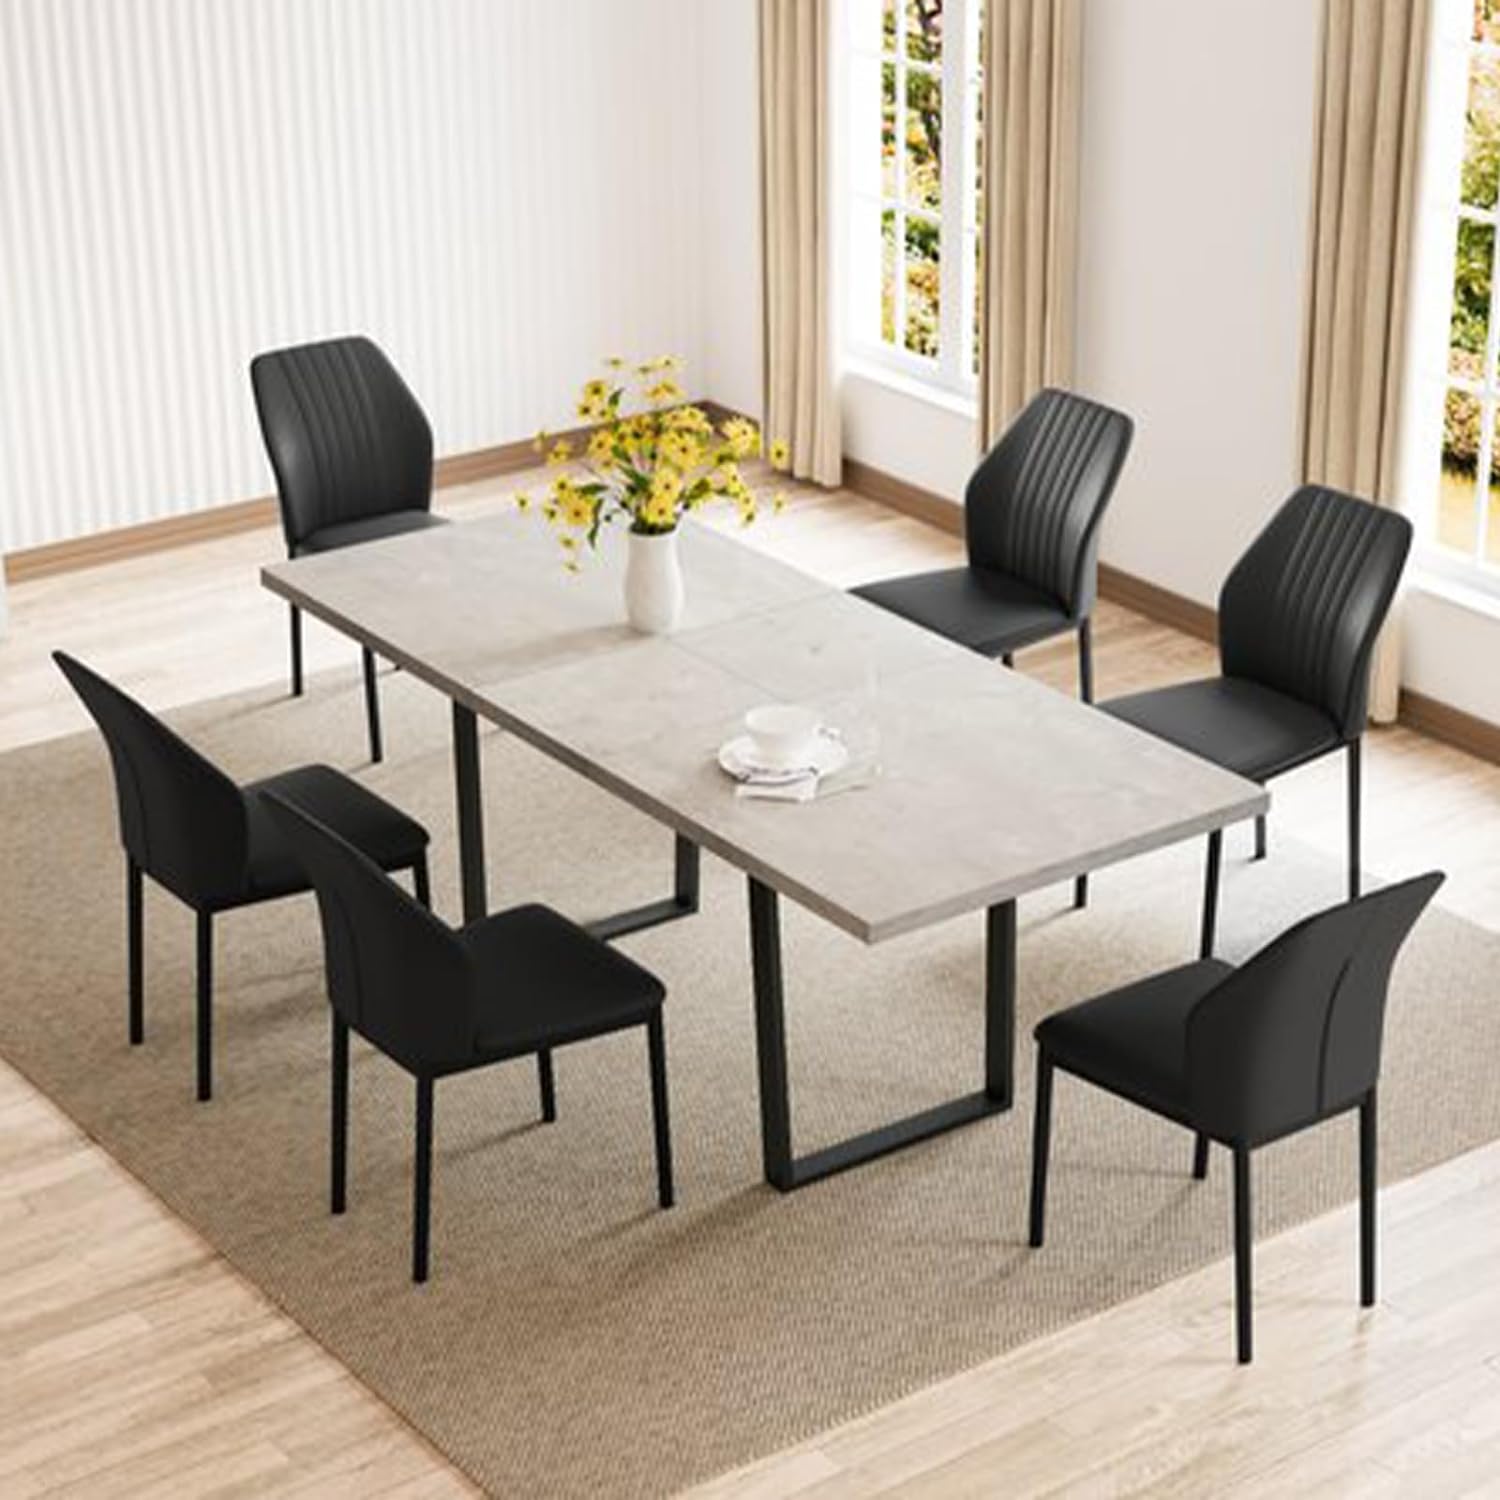 ZckyCine Modern Mid-Century Dining Table Set for 6-8 People Kitchen Dining Room Table Set Extendable Wood Dining Table and 6 Upholstered Chairs, Home Kitchen Furniture